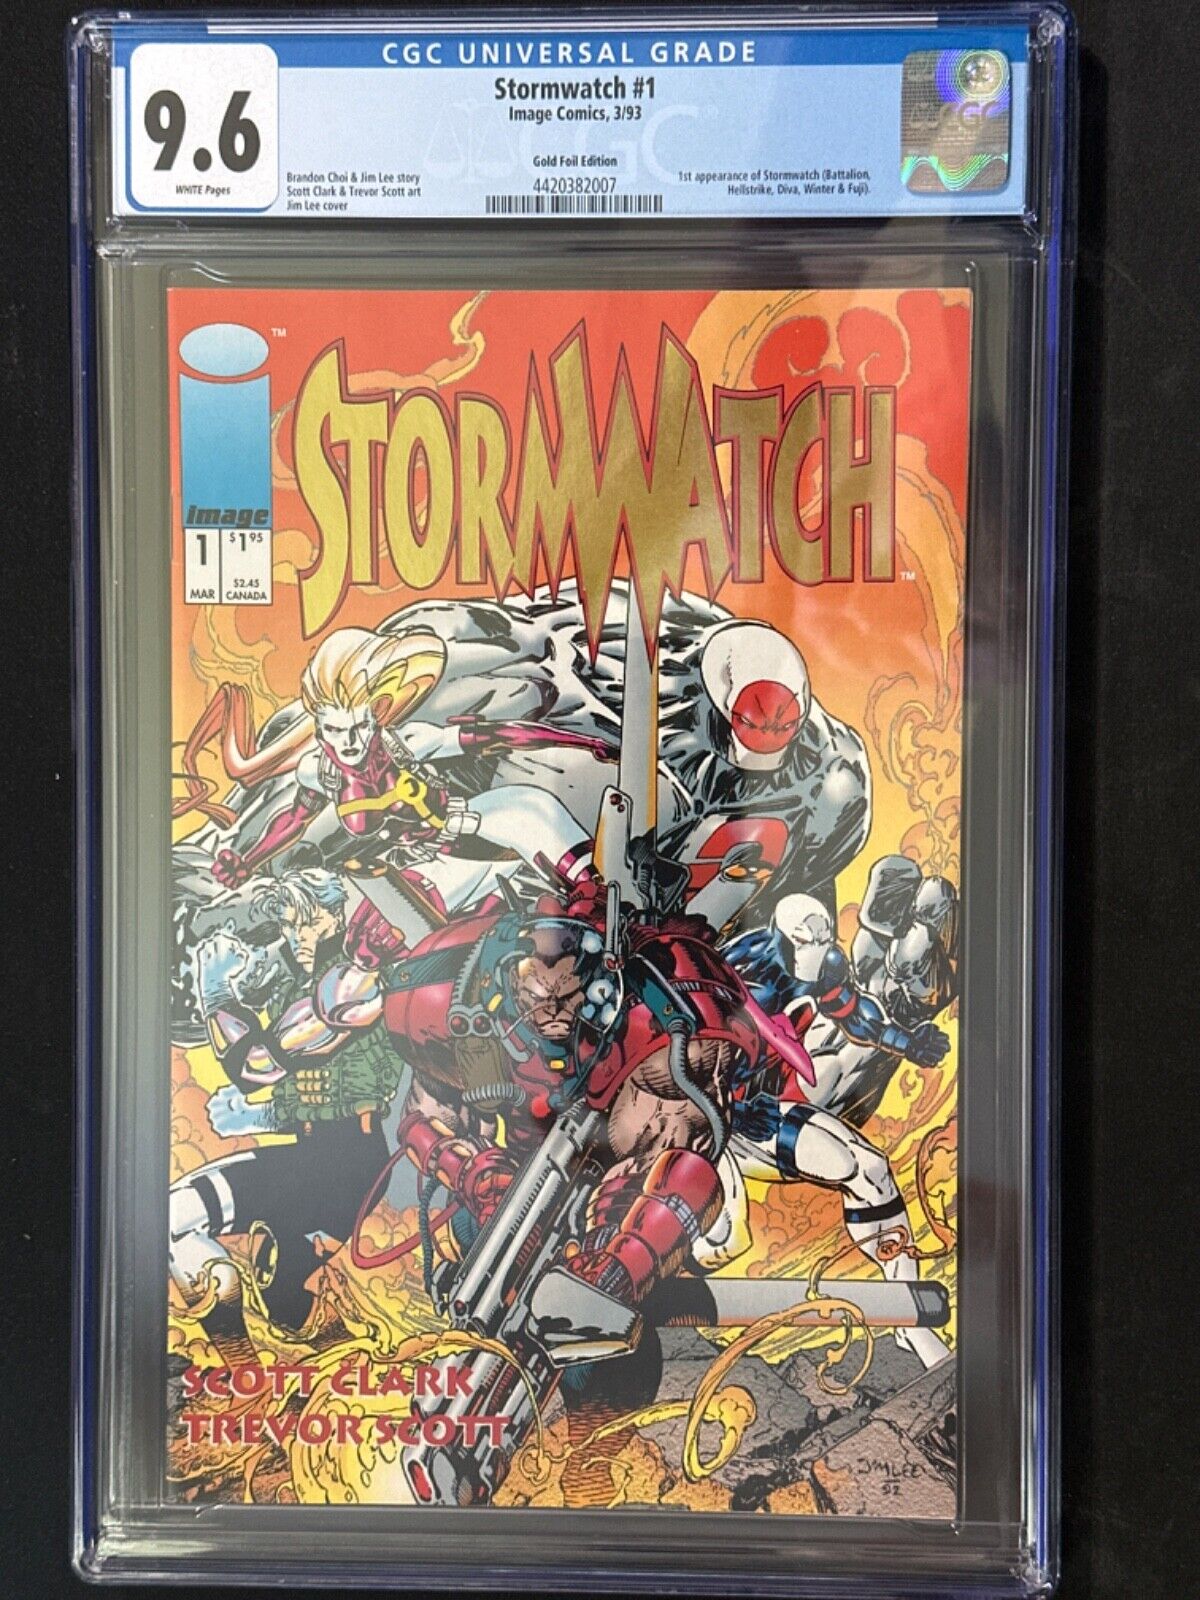 STORMWATCH 1 CGC 9.6 GOLD FOIL TITLE VARIANT (1993, IMAGE COMICS) - VERY RARE 